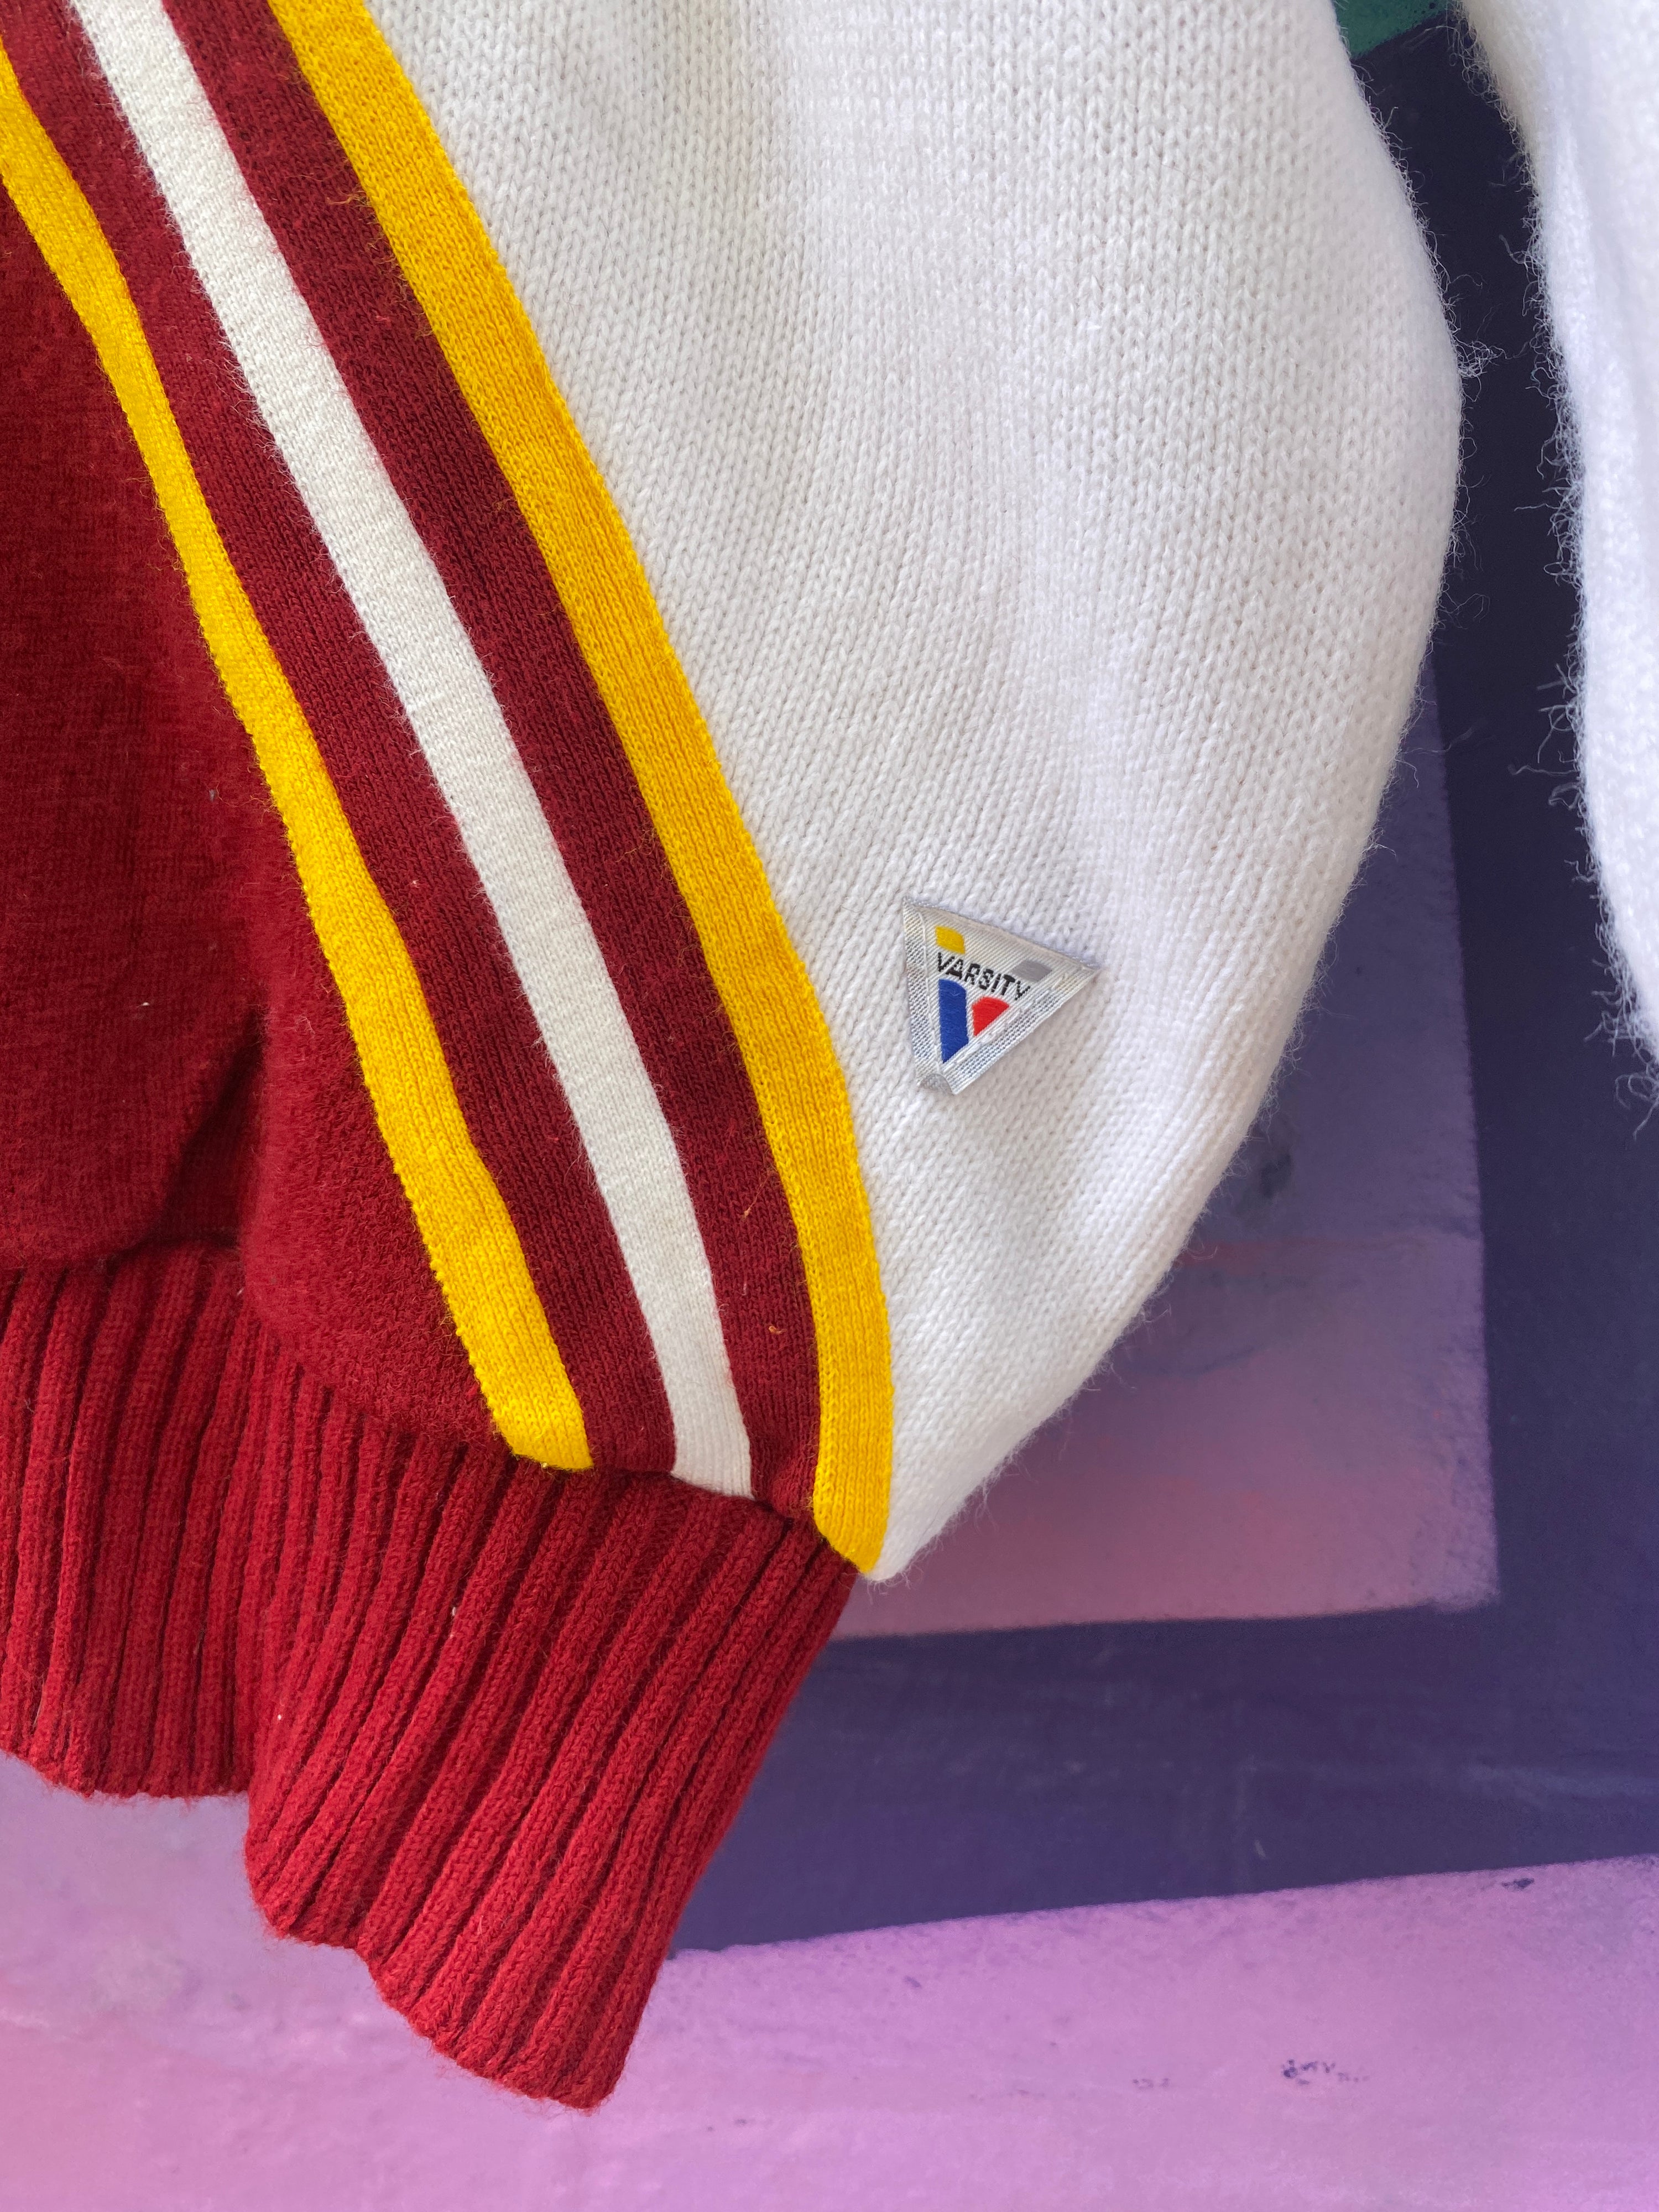 S - WHS Varsity Vintage Knit Sweater Red/Yellow/White